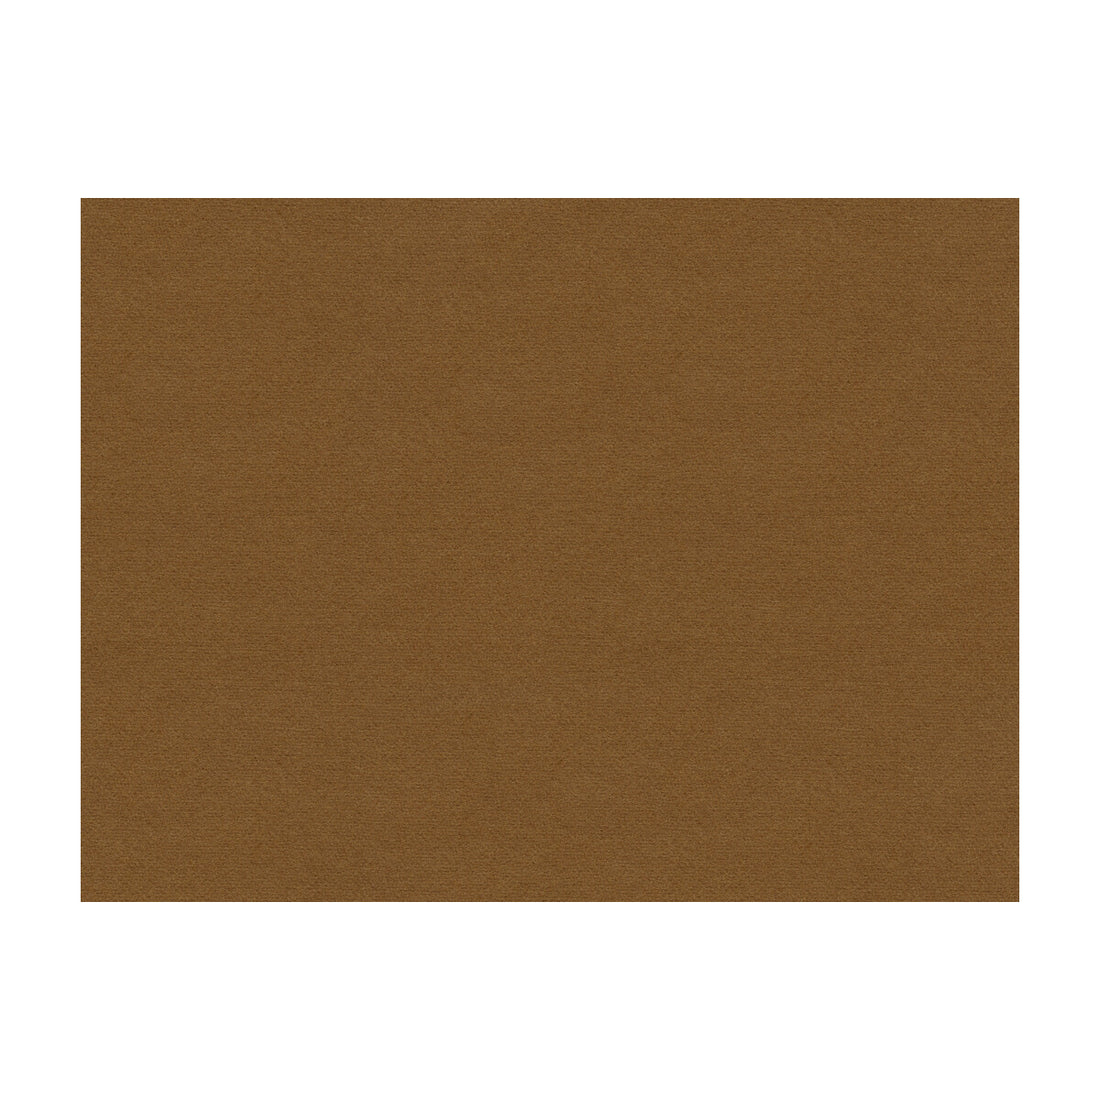 Chevalier Wool fabric in mocha color - pattern 8013149.6.0 - by Brunschwig &amp; Fils